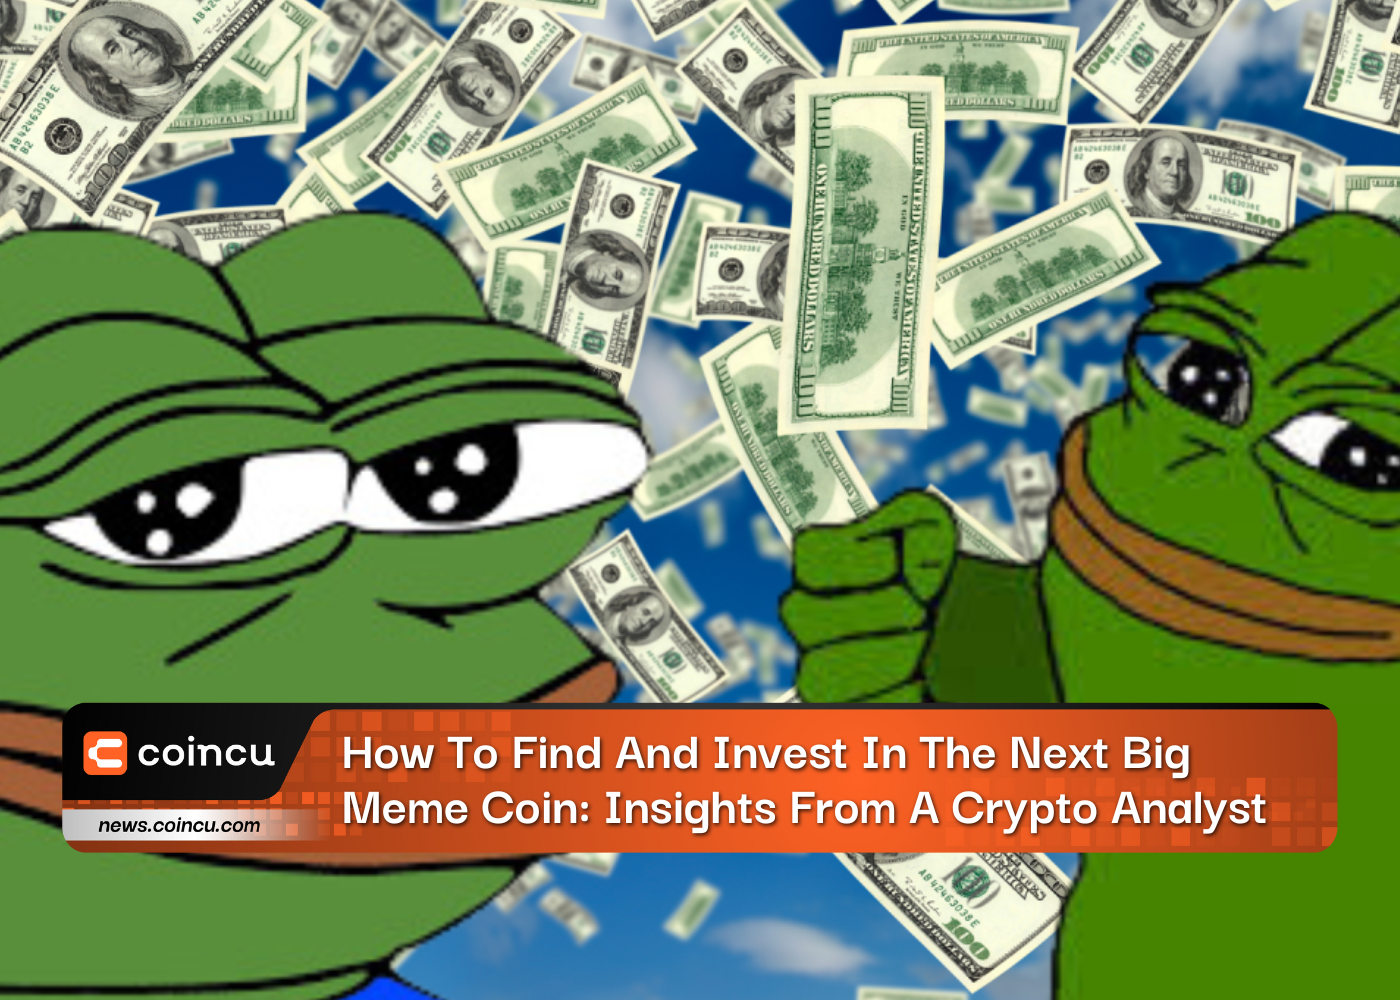 How To Find And Invest In The Next Big Meme Coin: Insights From A Crypto Analyst